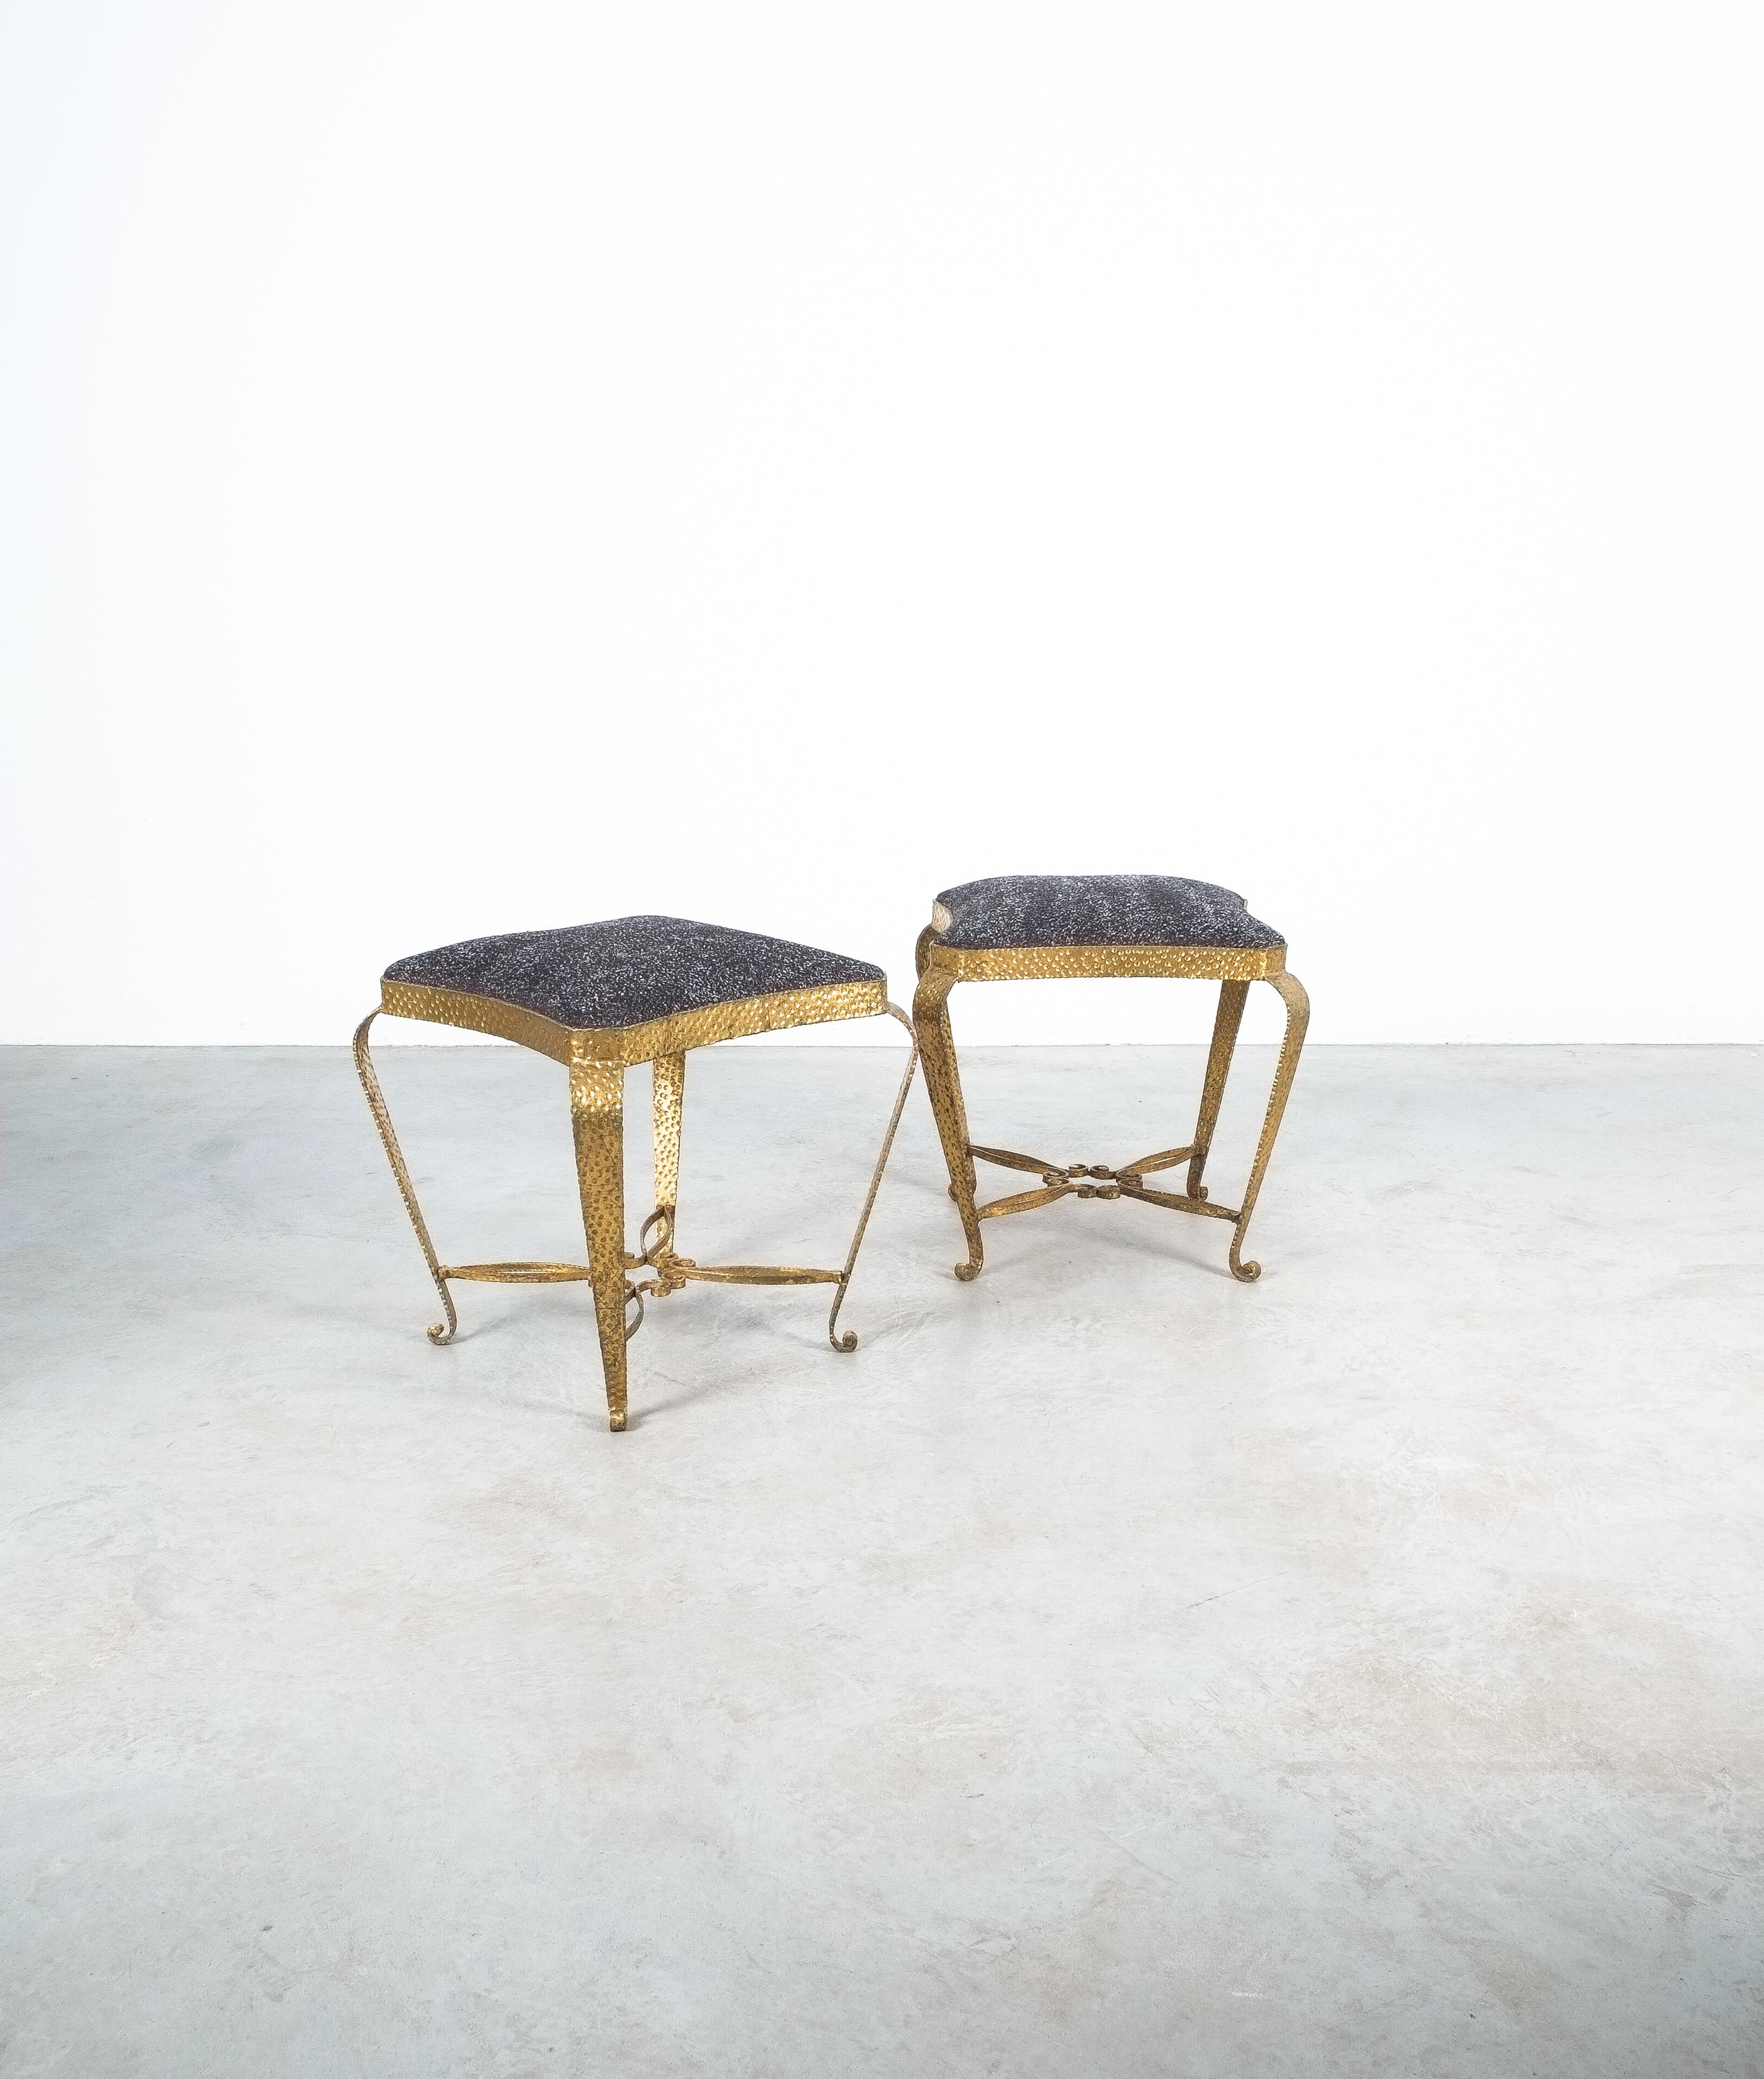 Pair of golden Pier Luigi Colli iron bedroom stools, Italy, 1950- priced as a pair

Nice pair of newly upholstered golden pier Luigi Colli iron bedroom stools, Italy, 1950. Cute pair of hammered gilt iron benches. We upholstered the stools with